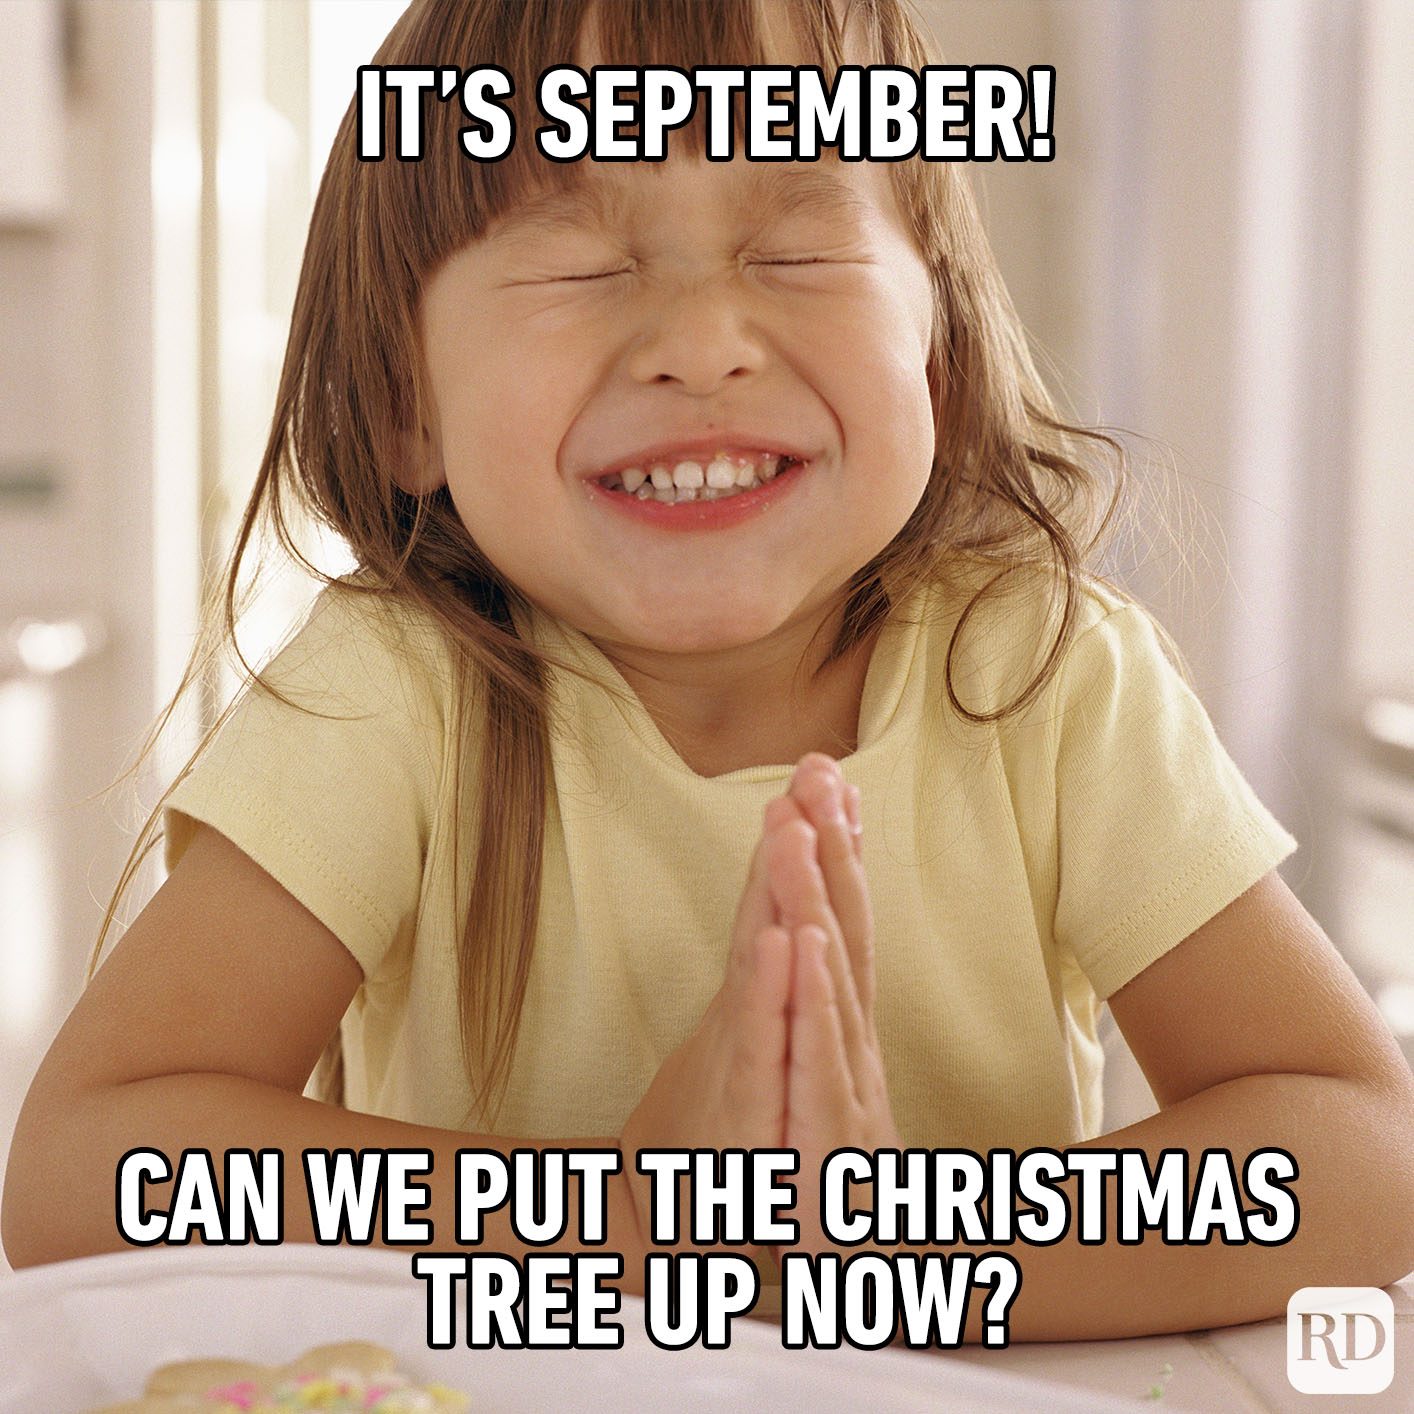 Meme text: It’s September! Can we put the Christmas tree up now?